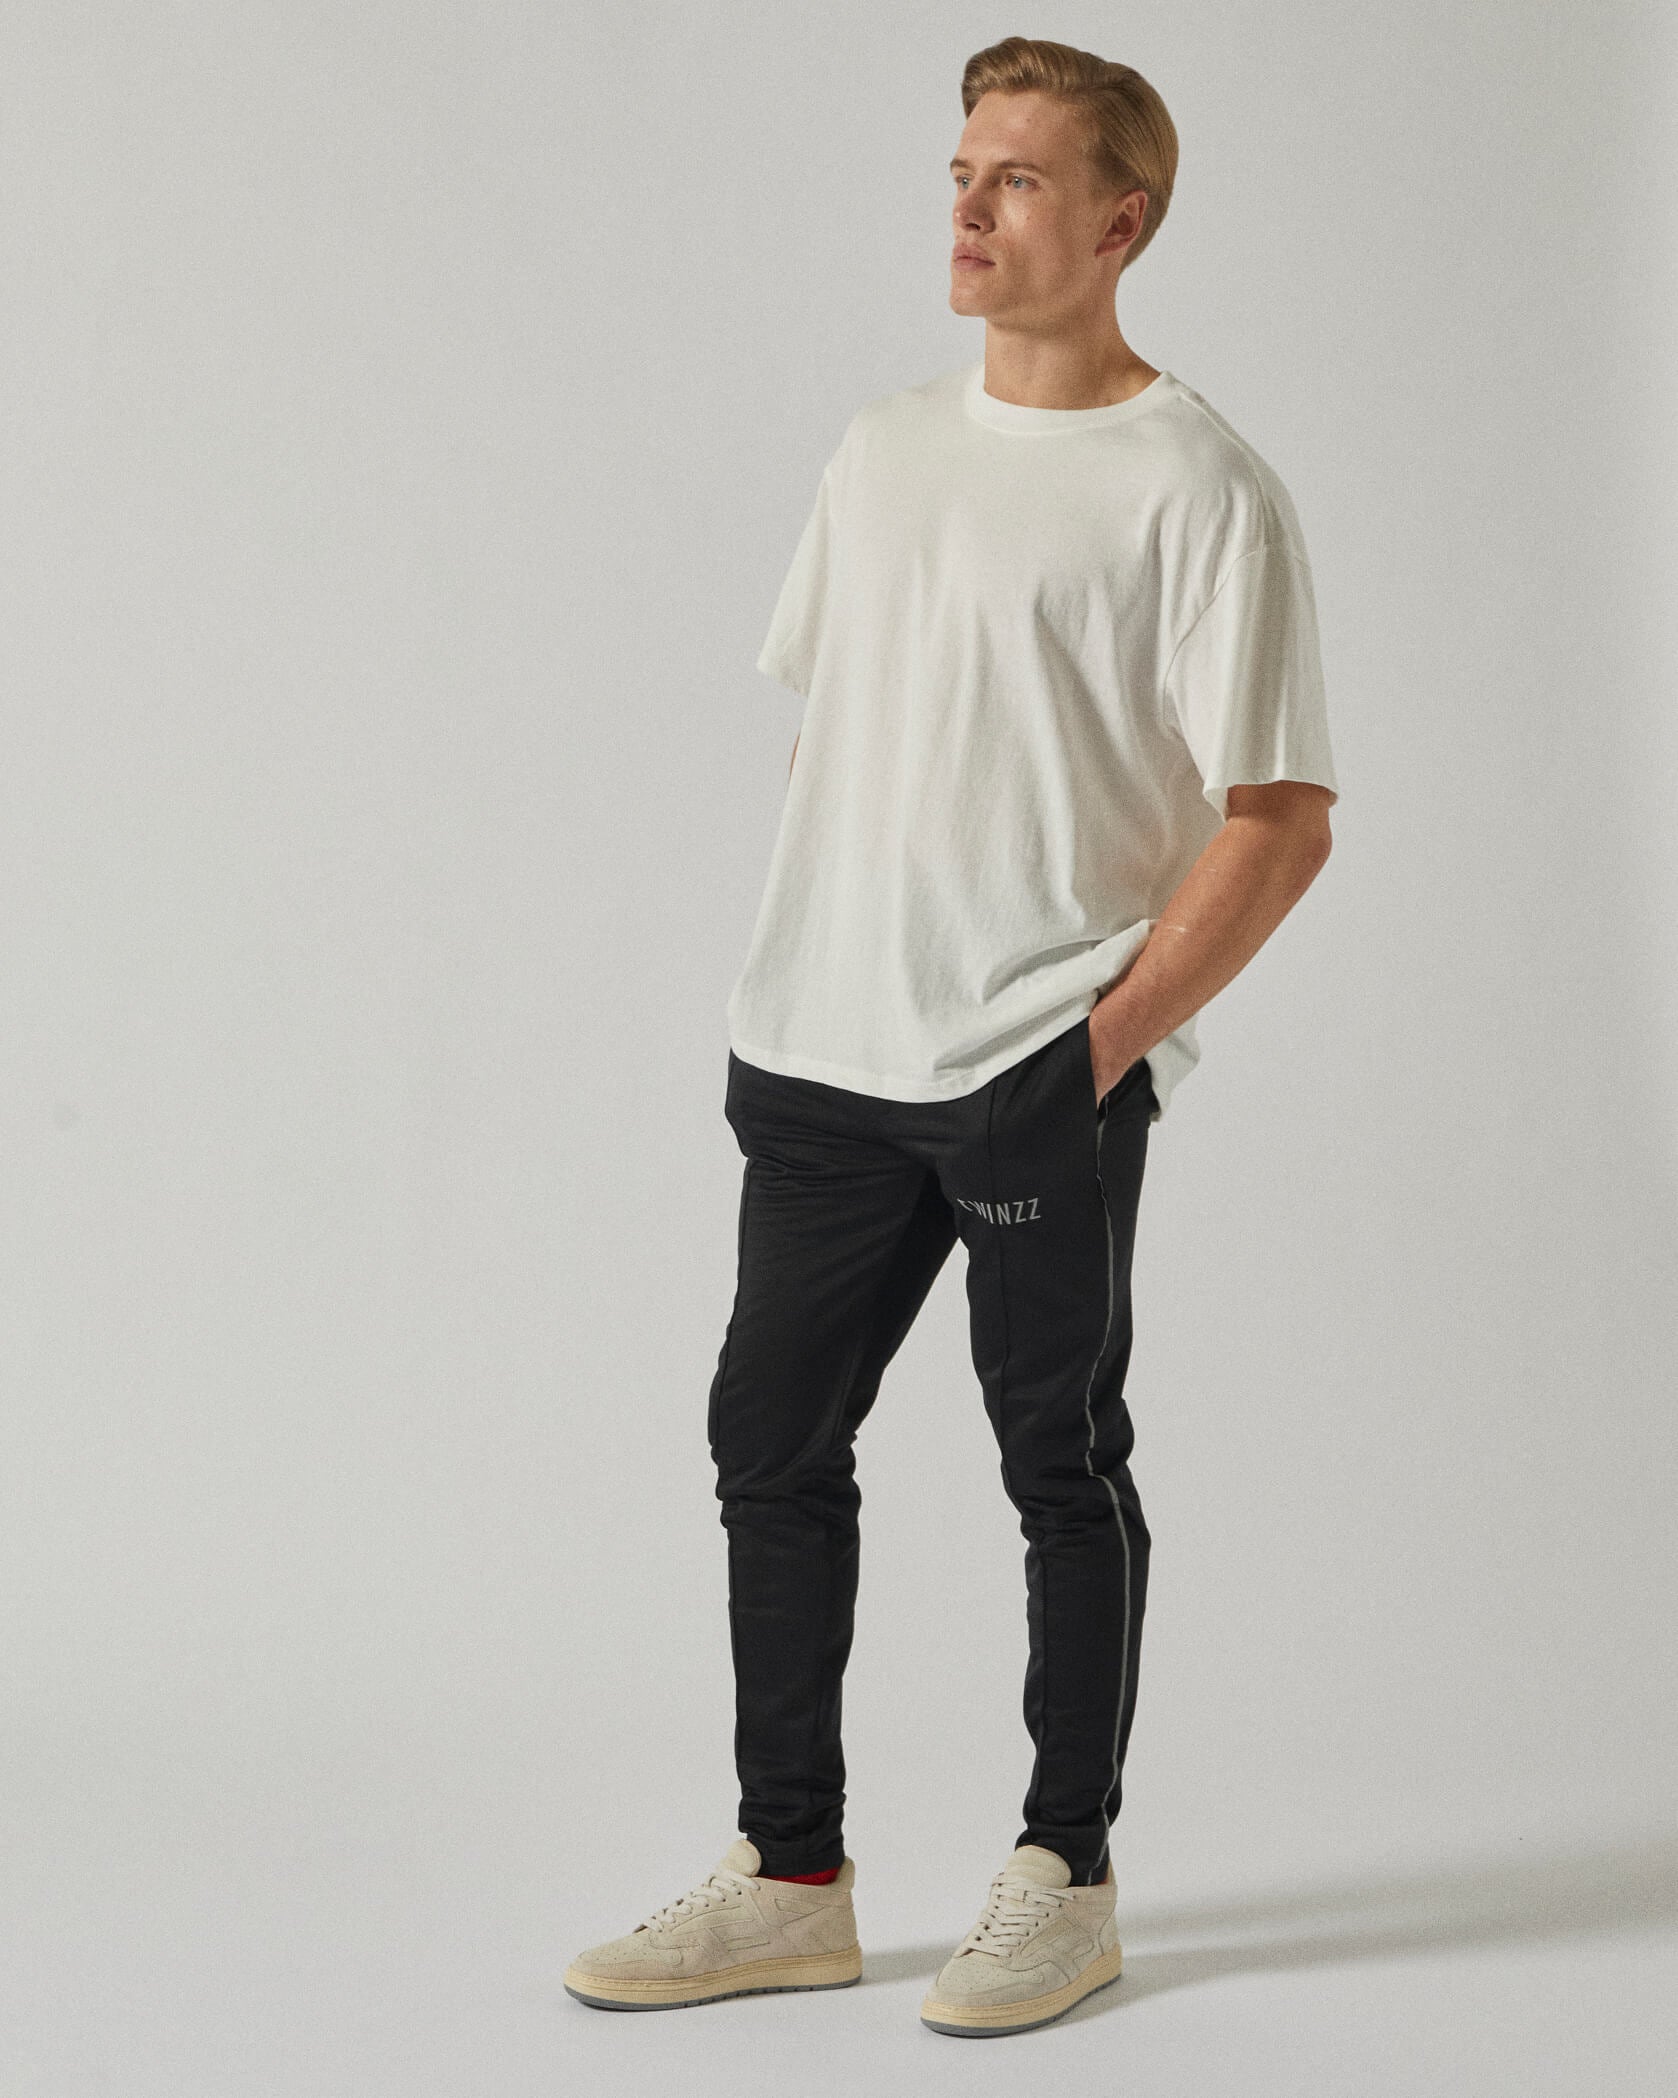 Twinzz Technical black track pant